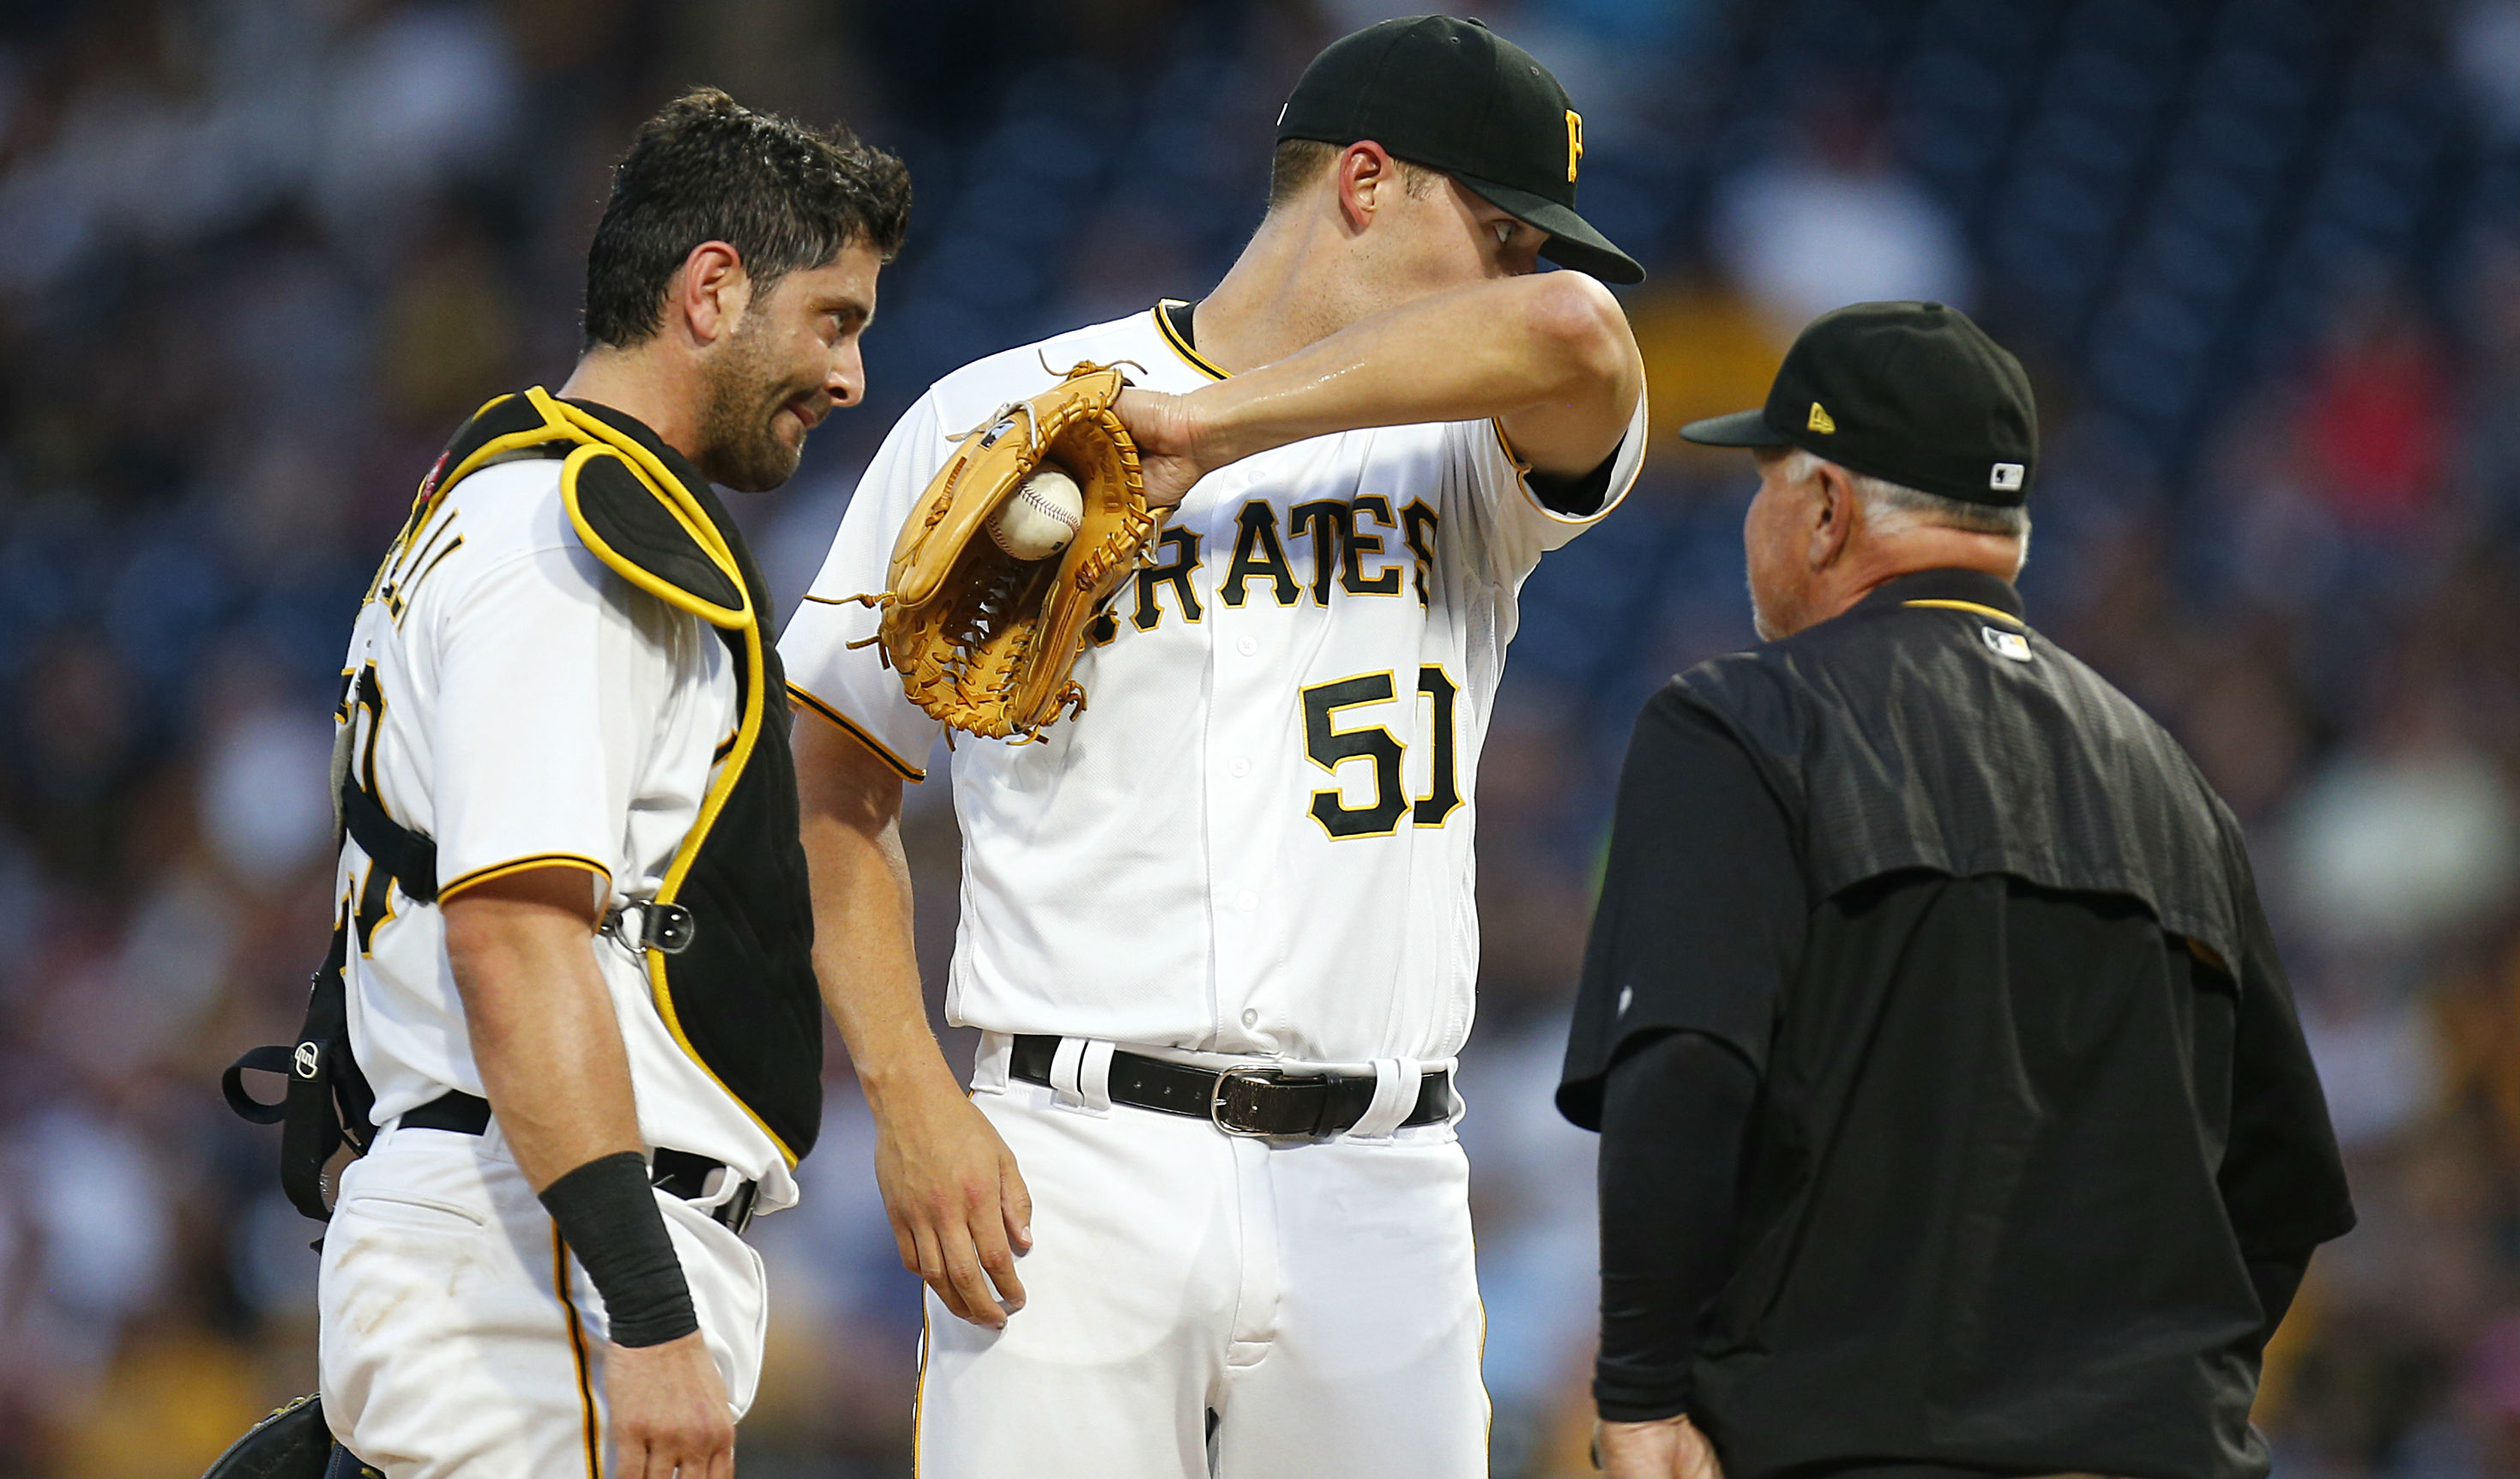 Taillon also underwent Tommy John surgery in 2014.